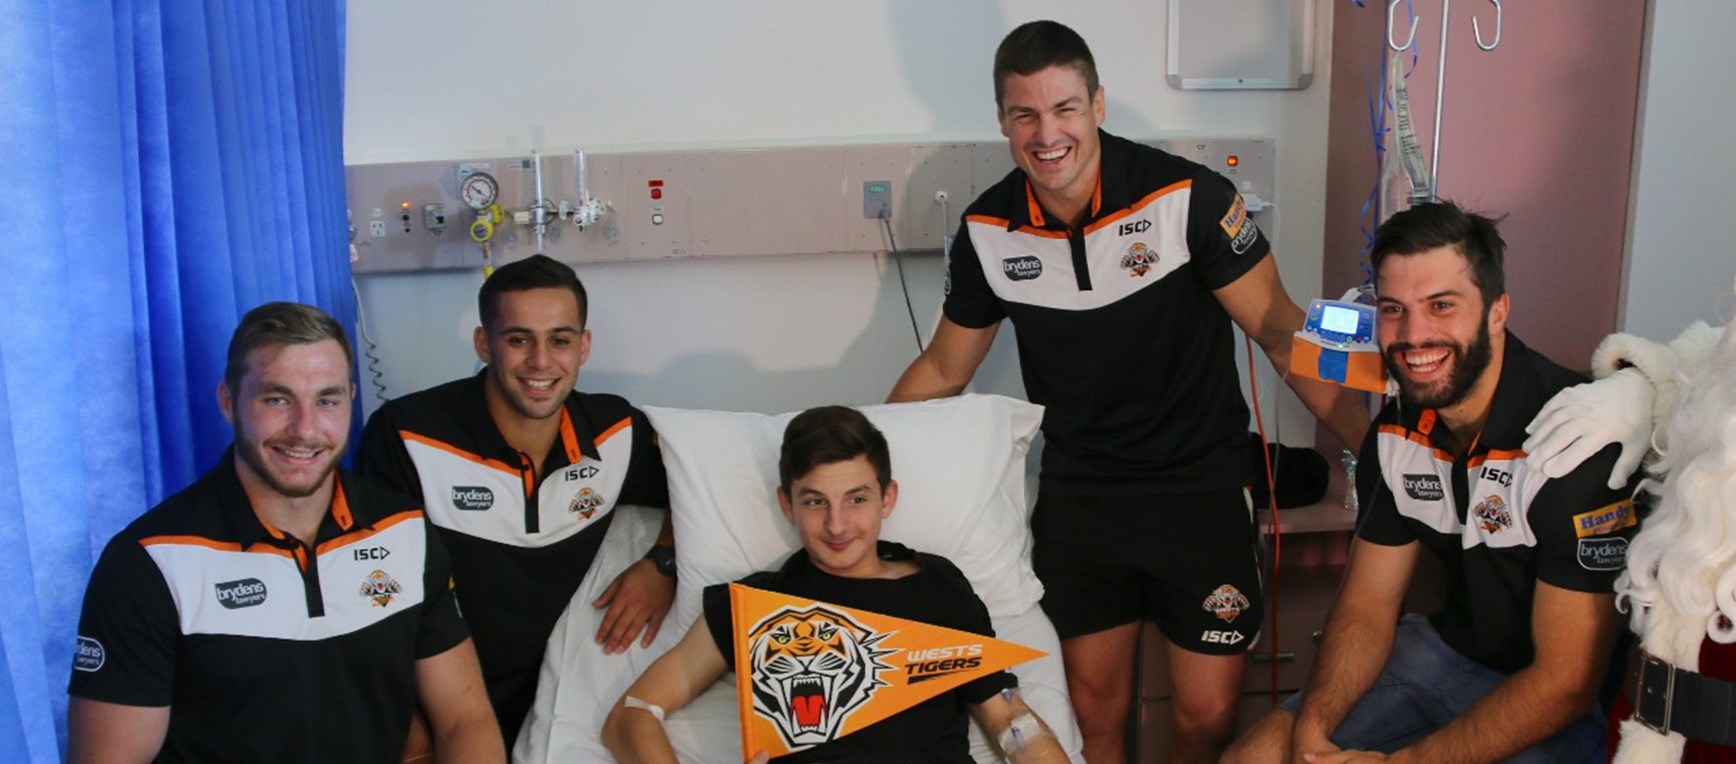 Players deliver Christmas presents at hospital